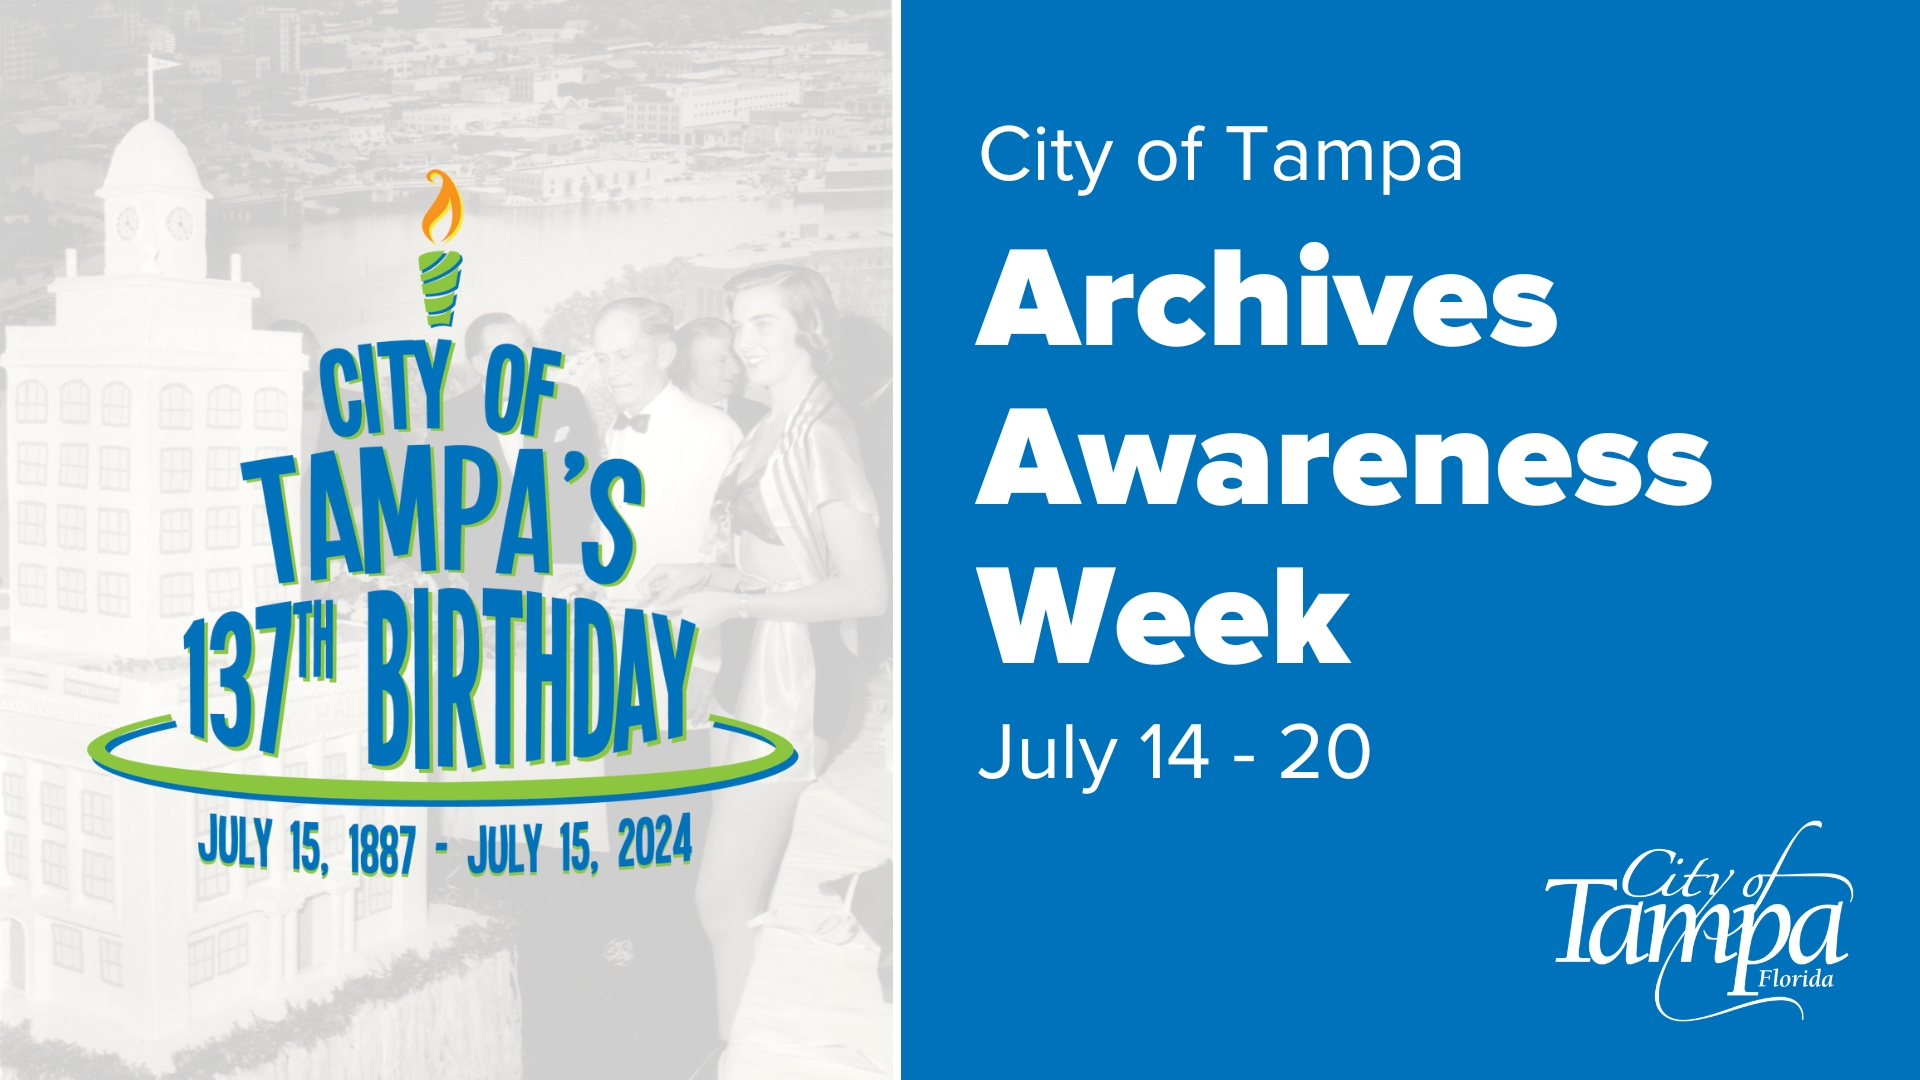 City of Tampa Archives Awareness Week